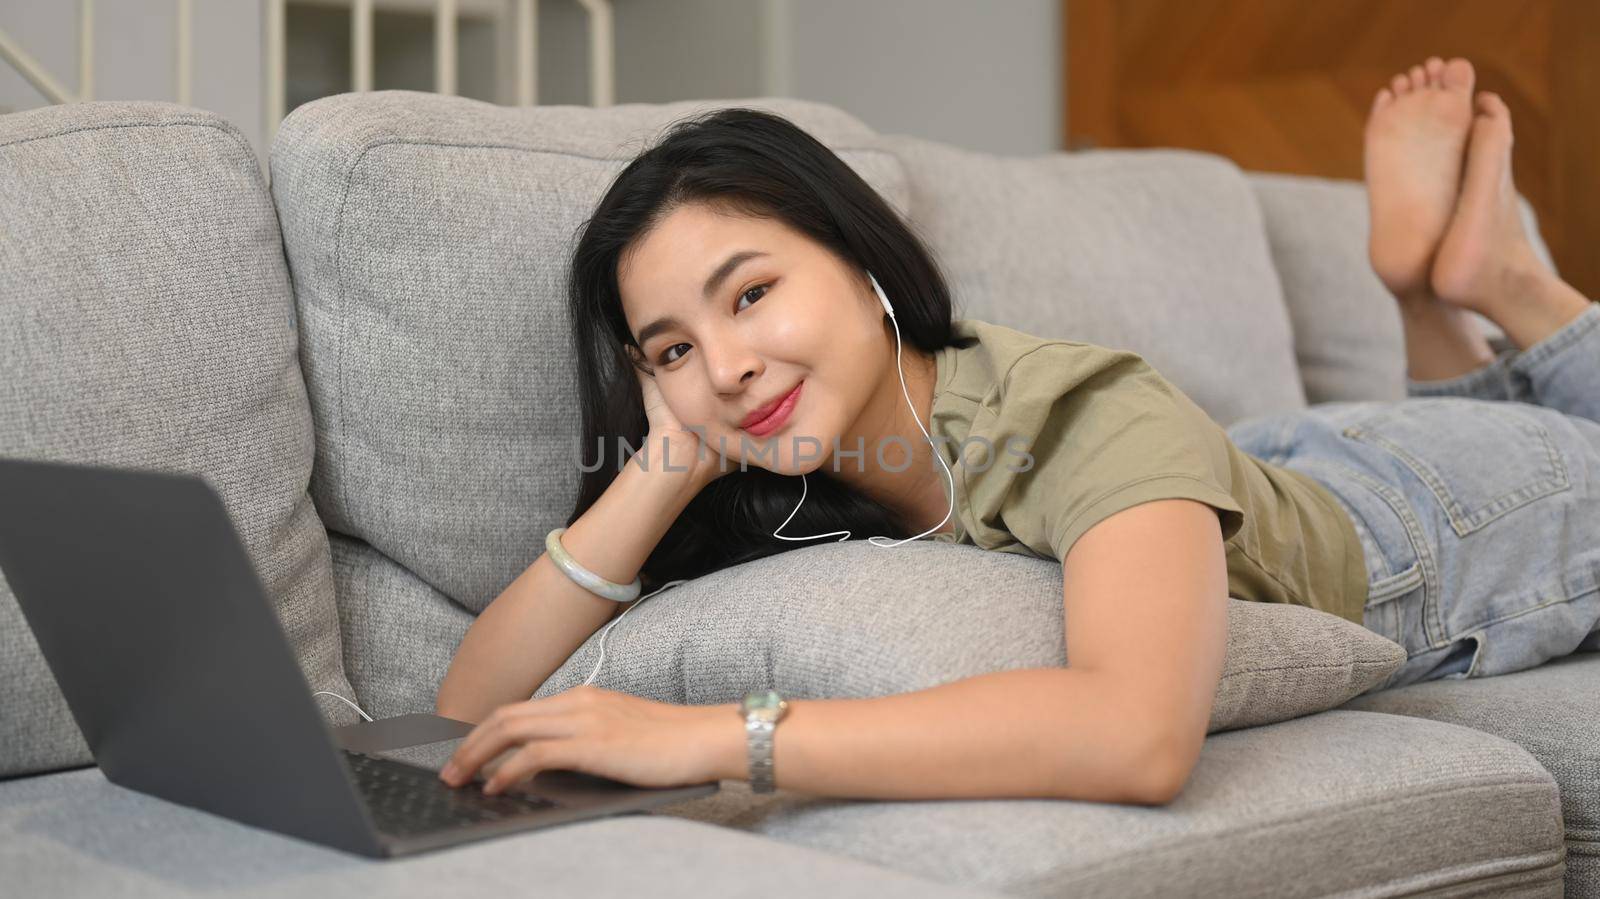 Pretty young asian woman lying on cozy couch and browsing internet via laptop computer.